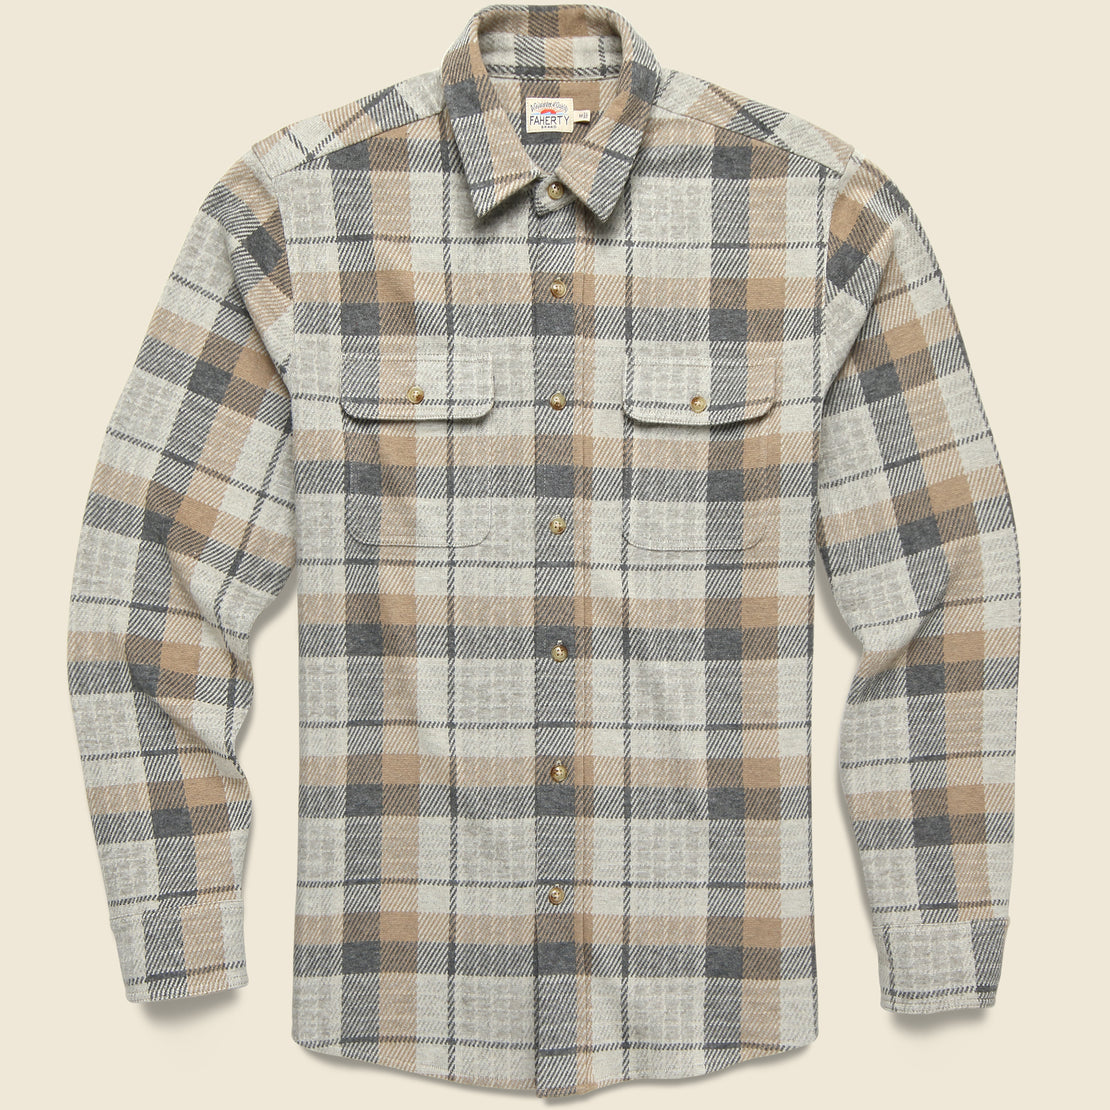 Faherty Legend Sweater Shirt - Western Outpost Plaid